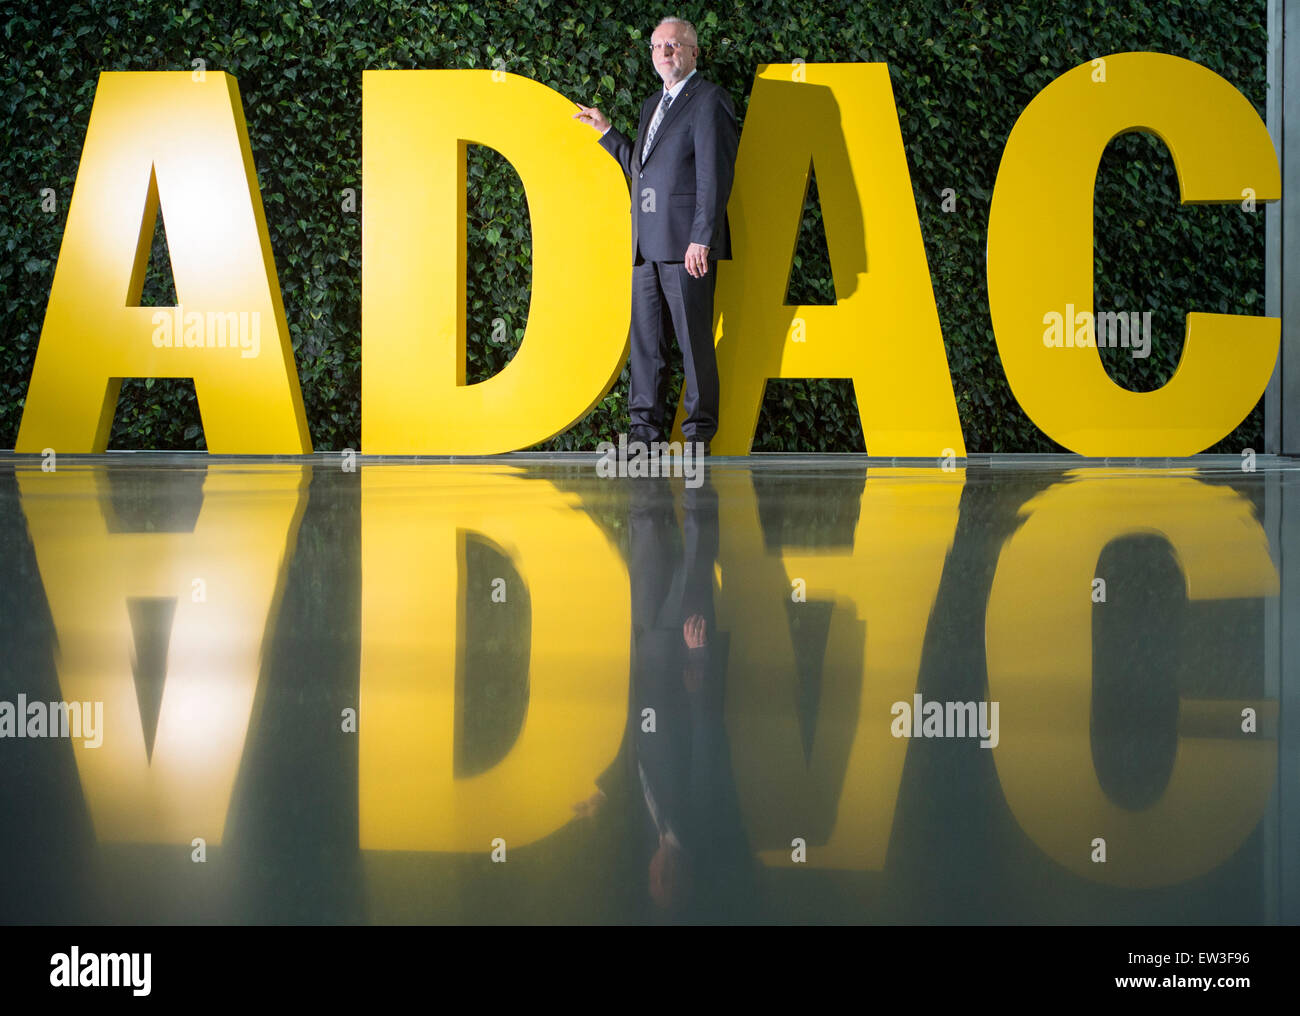 Munich, Germany. 17th June, 2015. President of ADAC August Markl stands in front of the logo of ADAC, which is reflected in the stone floor of the reception area of the automobile club's headquarters, after the annual press conference in Munich, Germany, 17 June 2015. The automobile club is presenting the outcomes of its subsidiaries. Photo: PETER KNEFFEL/dpa/Alamy Live News Stock Photo